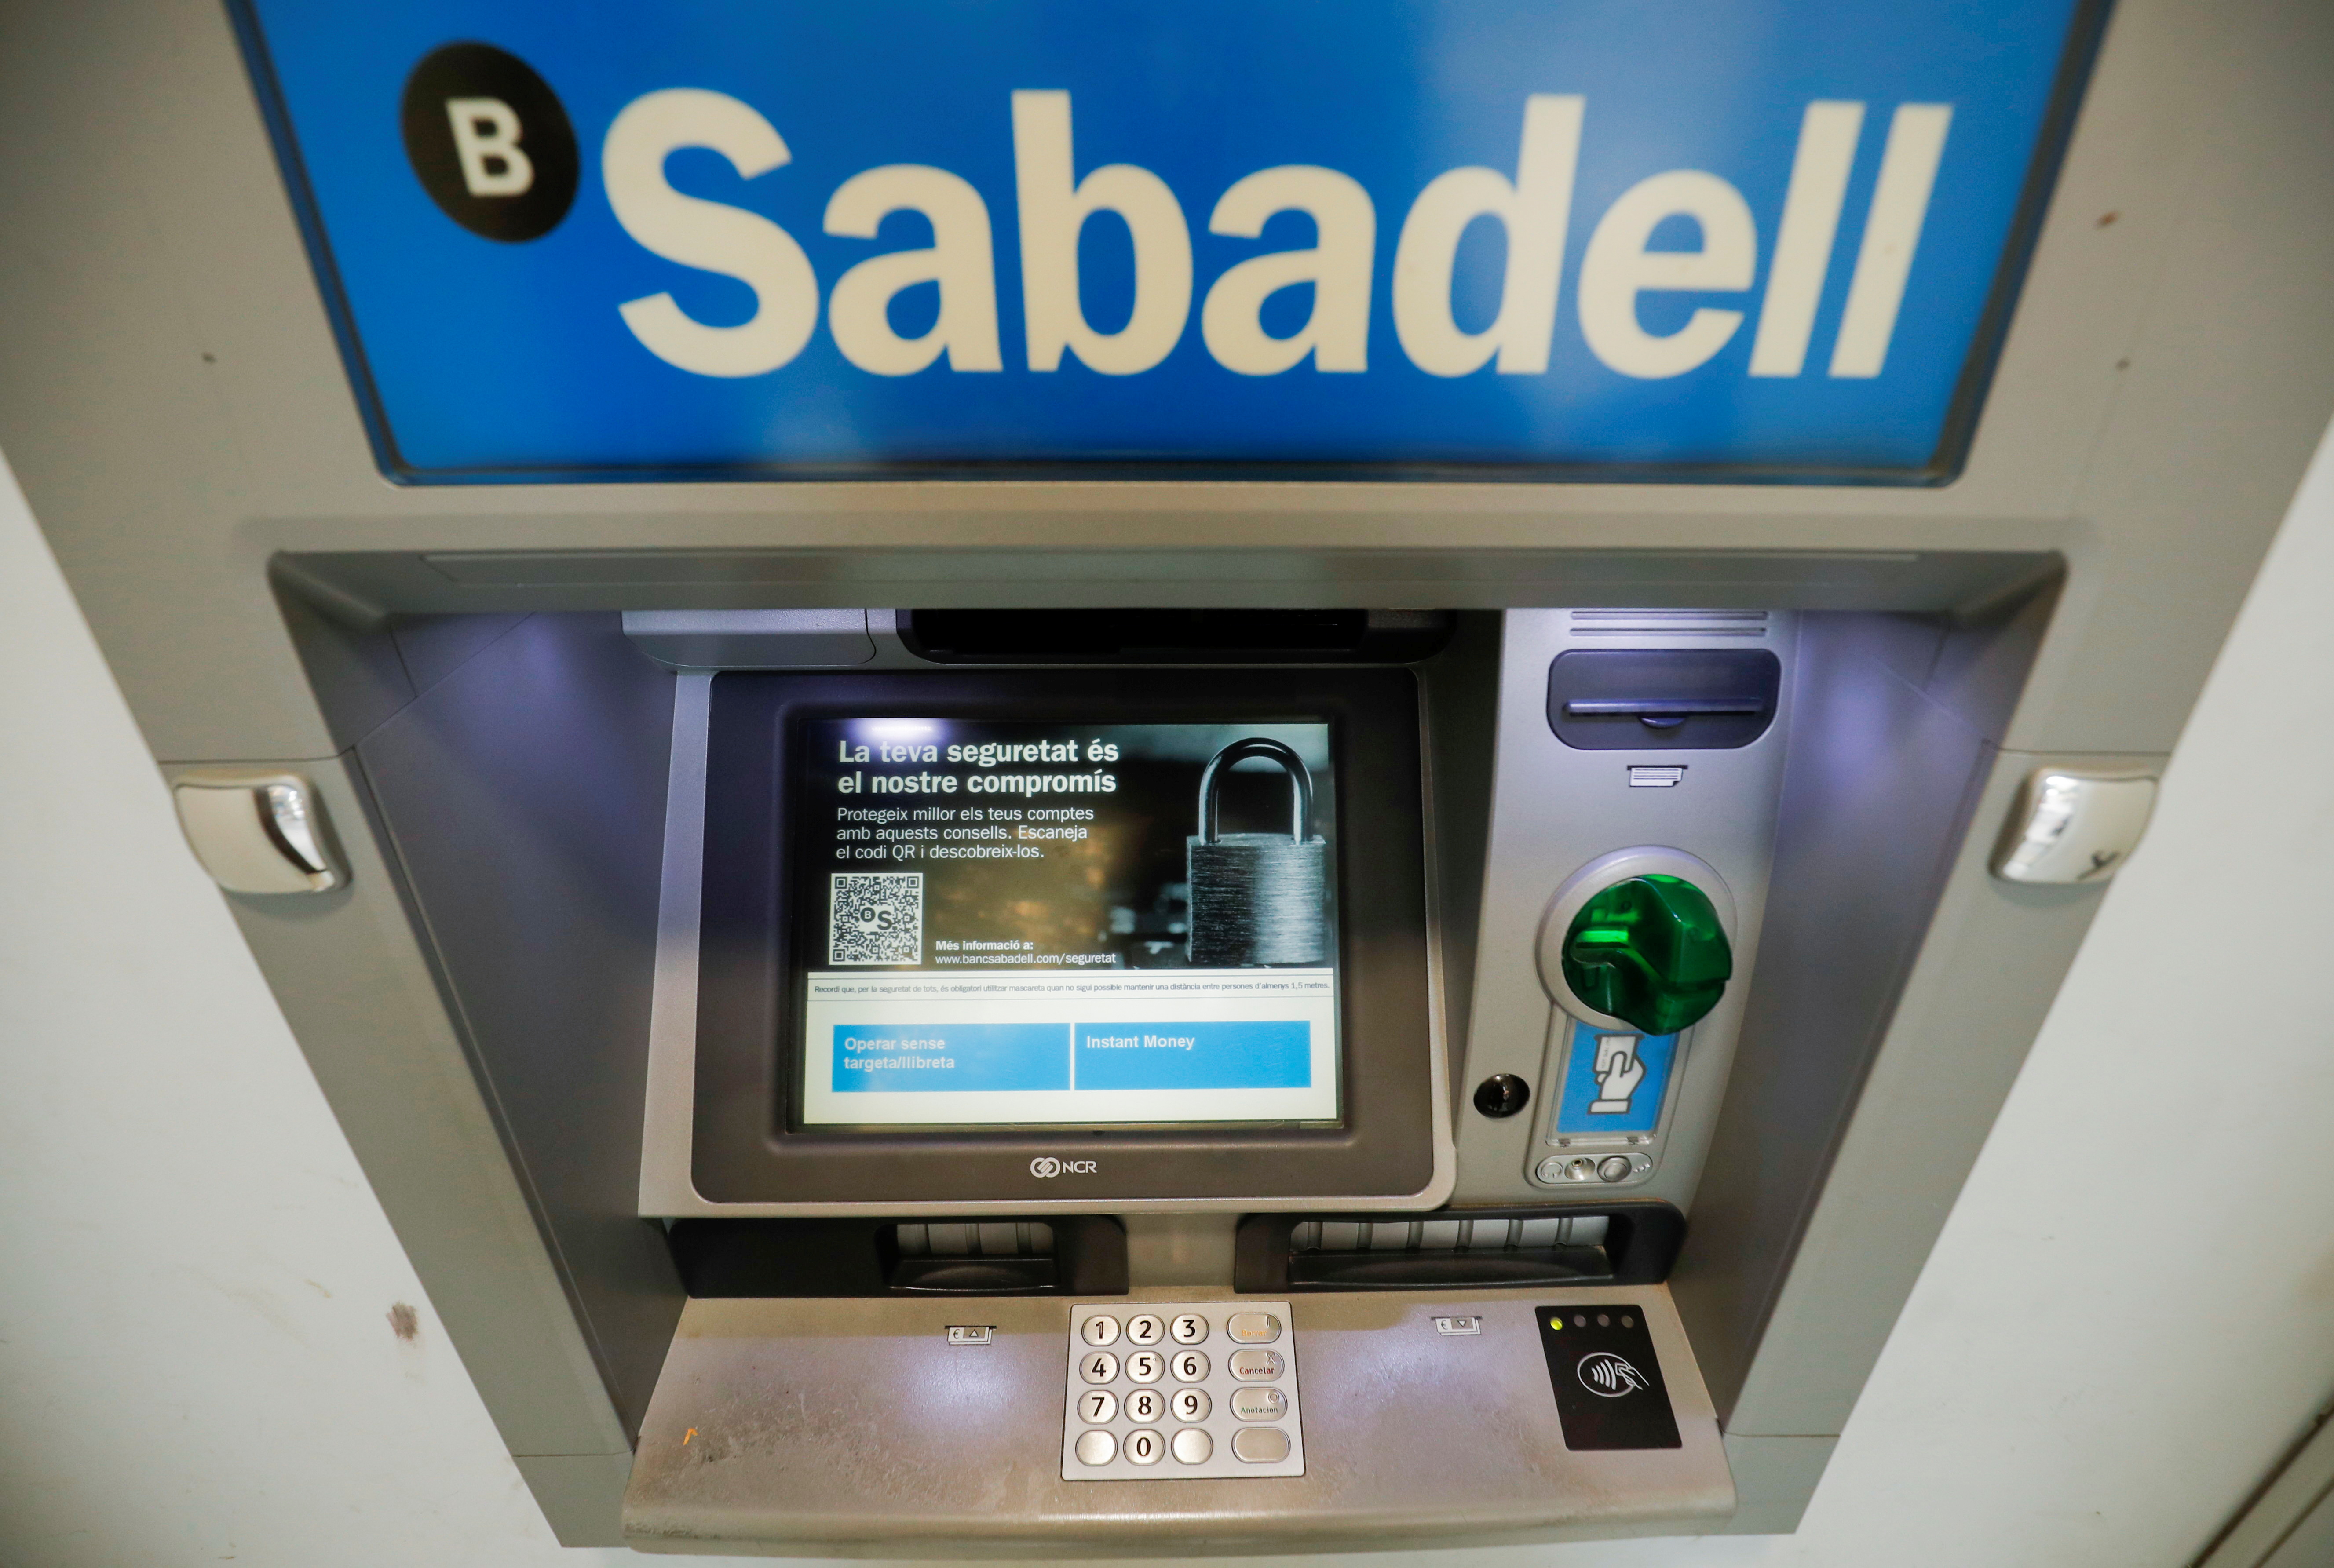 Sabadell bank's logo is seen at an ATM machine outside an office in Barcelona